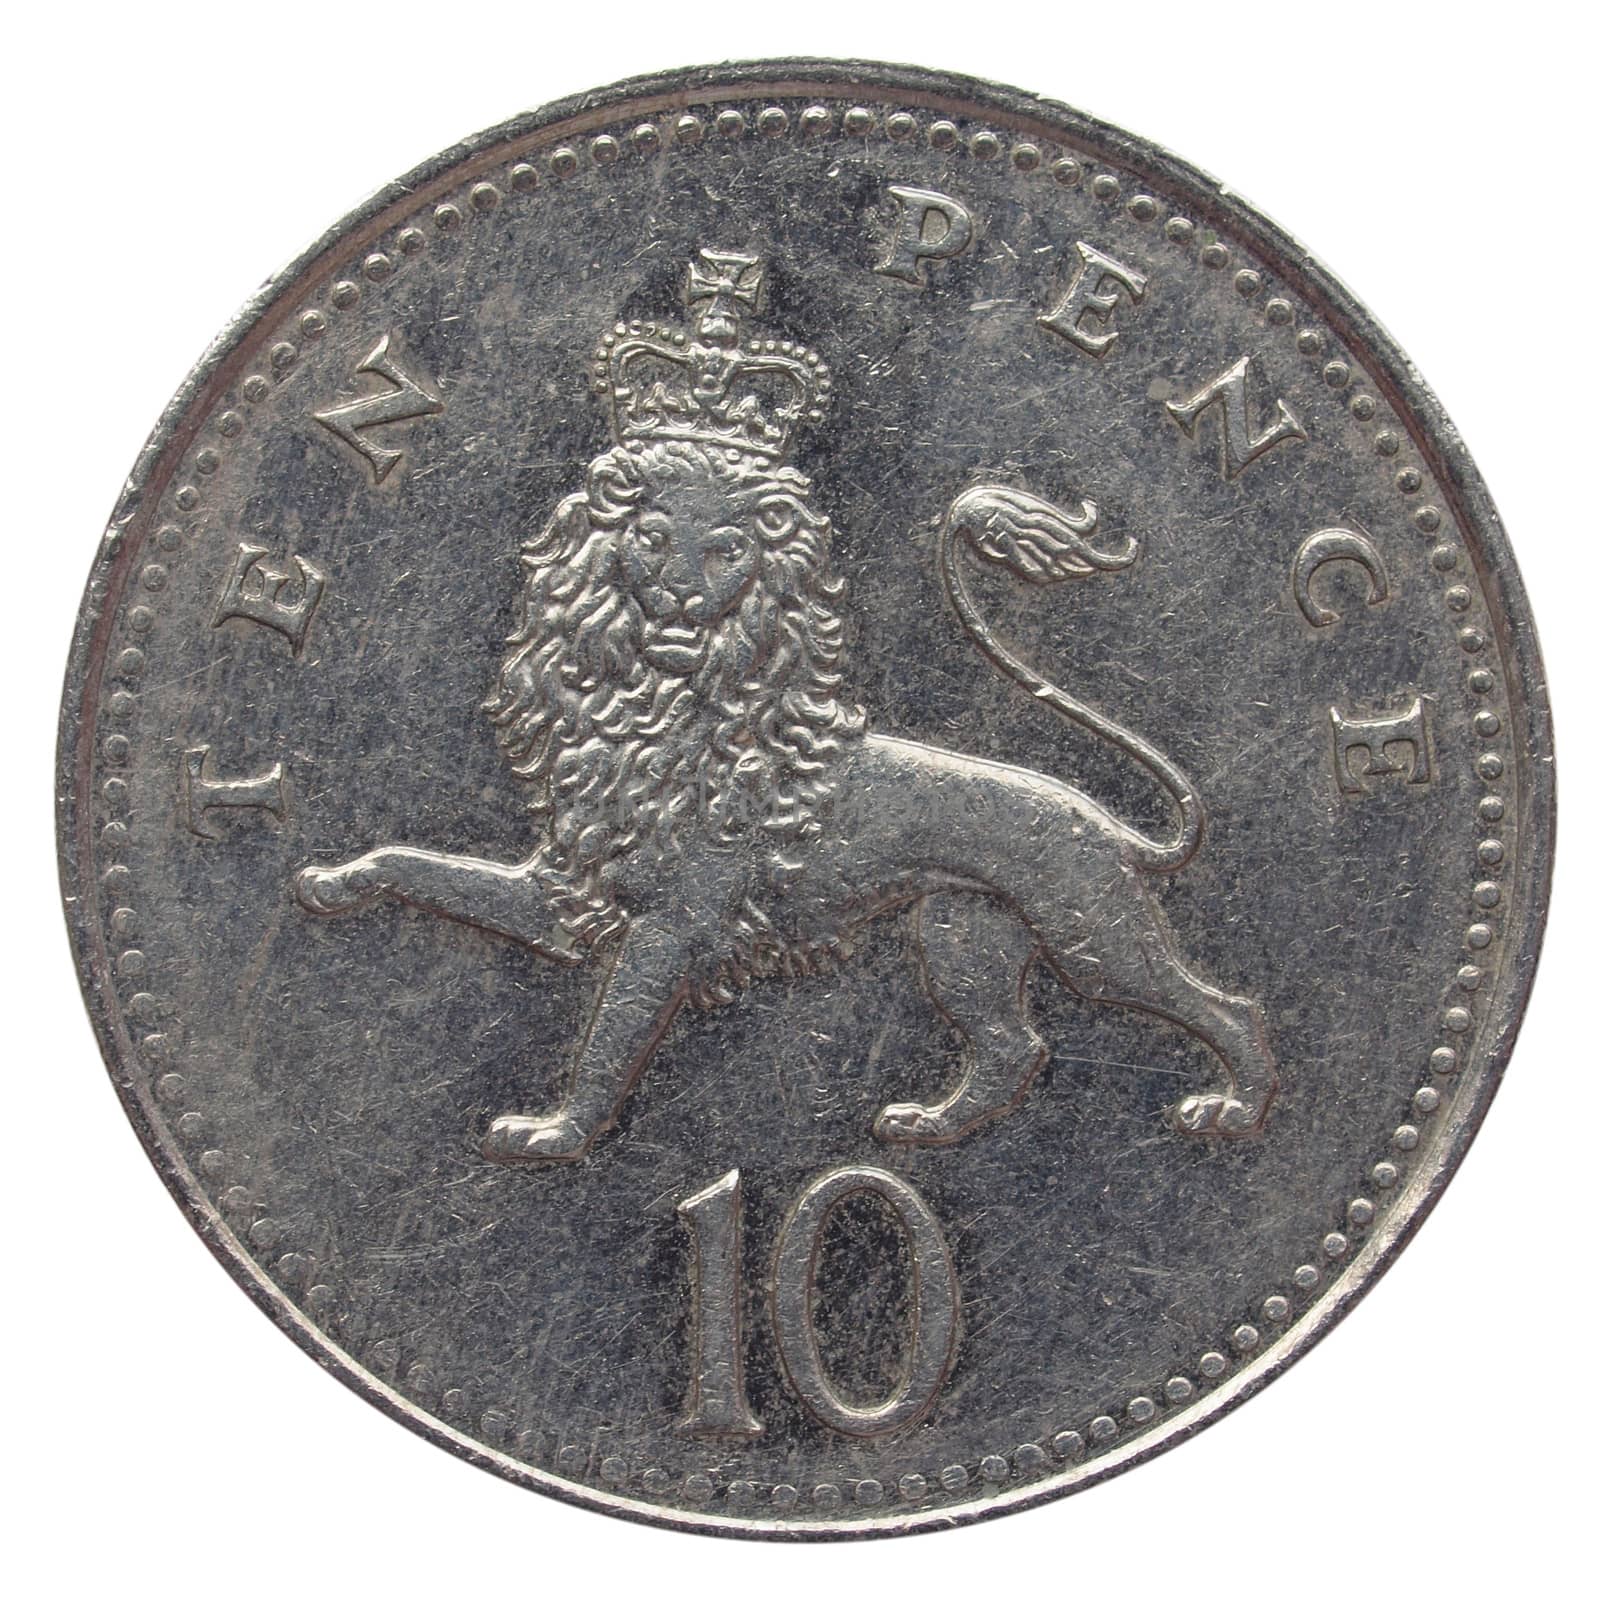 British Pounds coins (currency of United Kingdom) - 10 pence